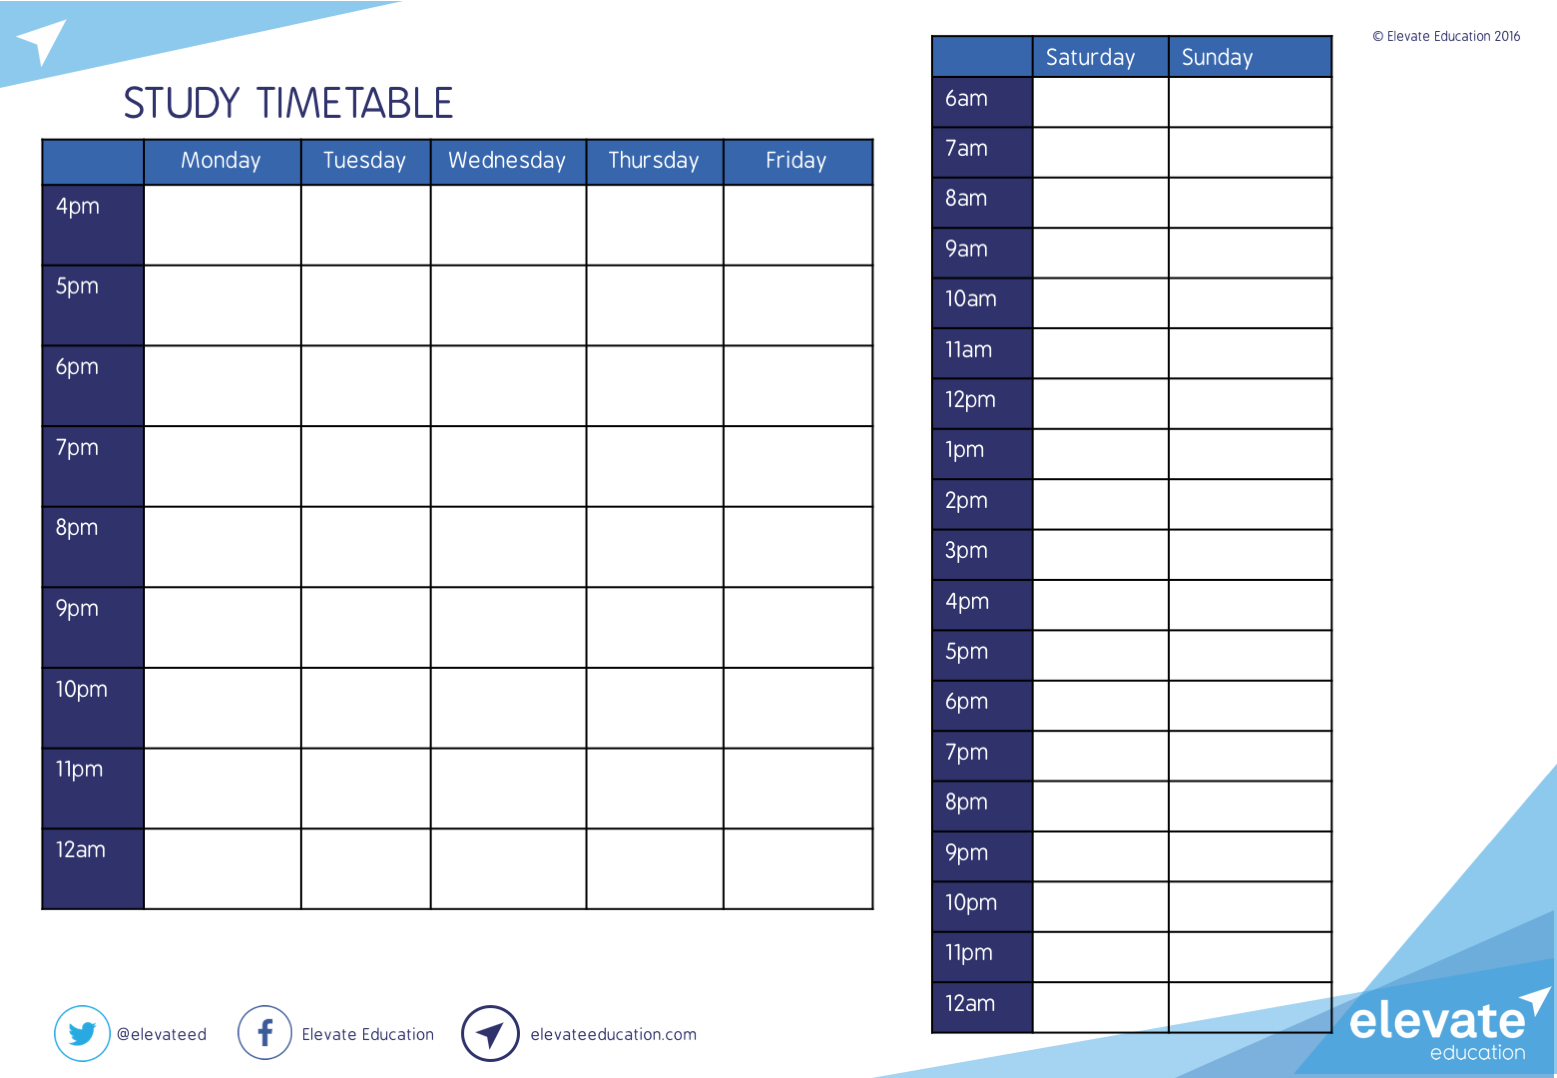 Study Timetable Elevate Education